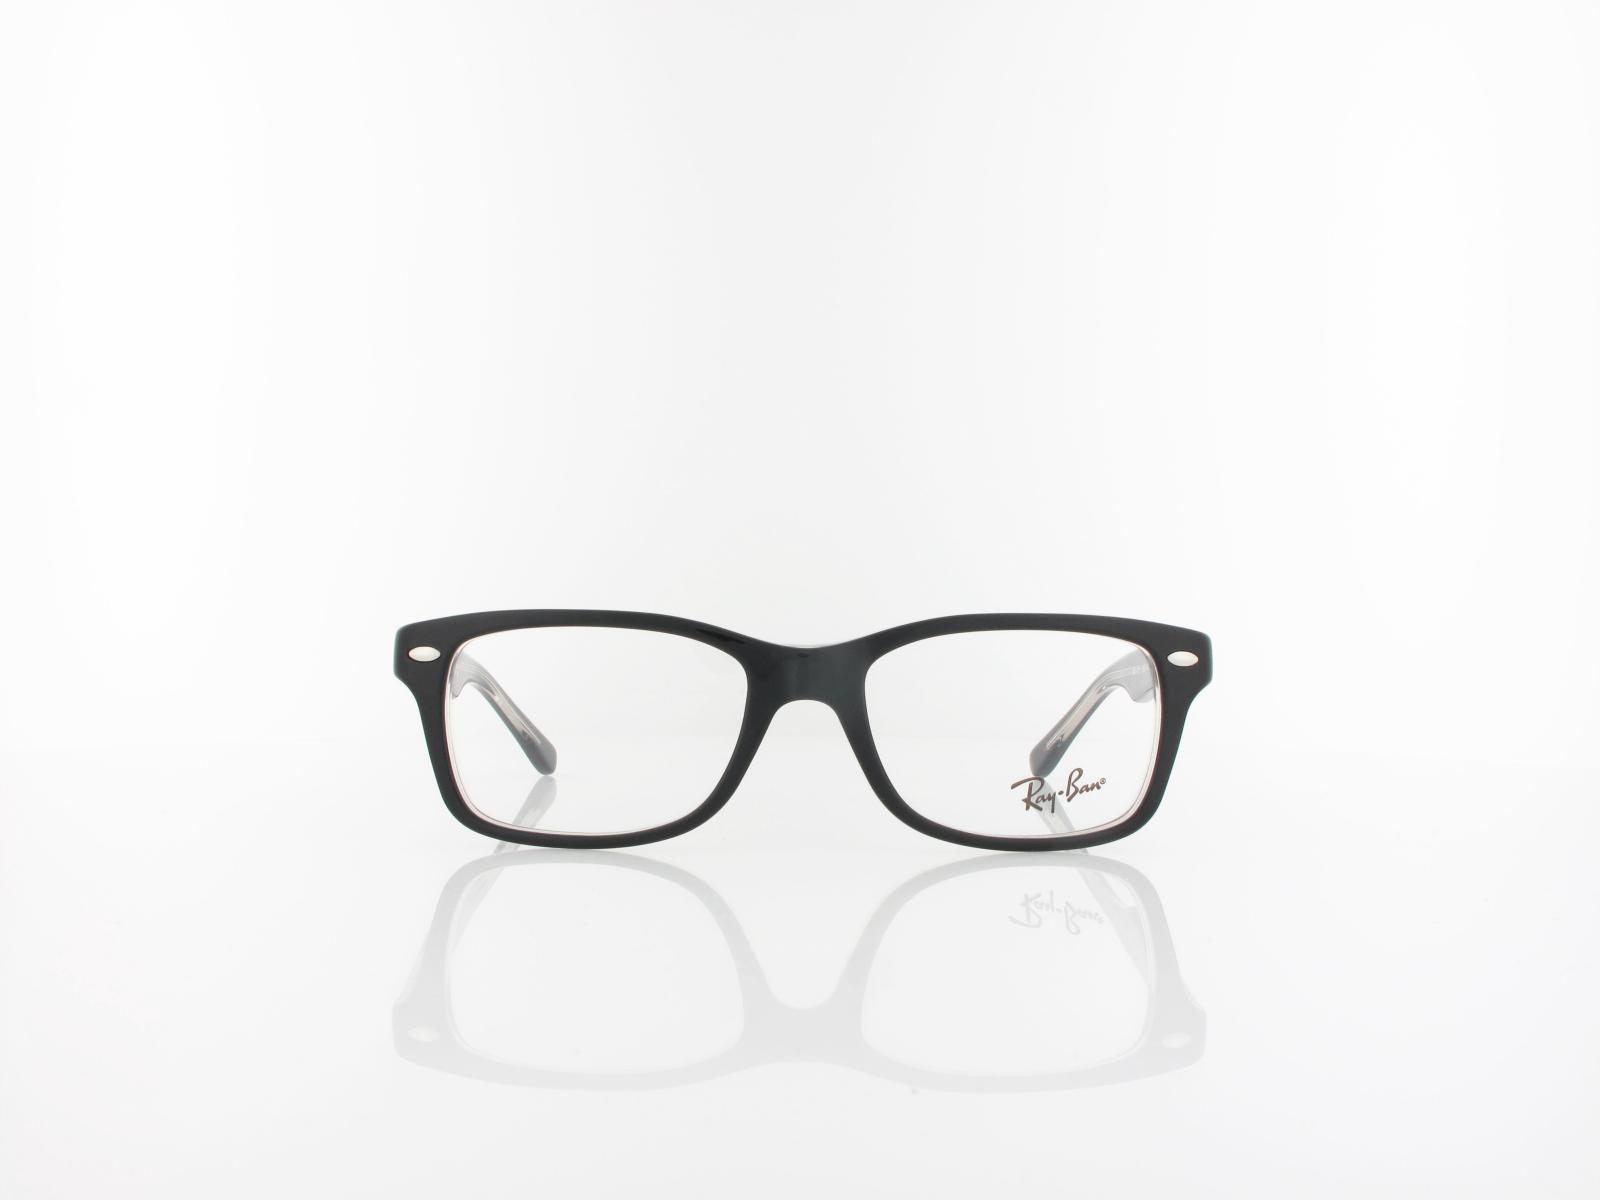 Ray Ban | RY1531 small 3529 48 | top black on transparent